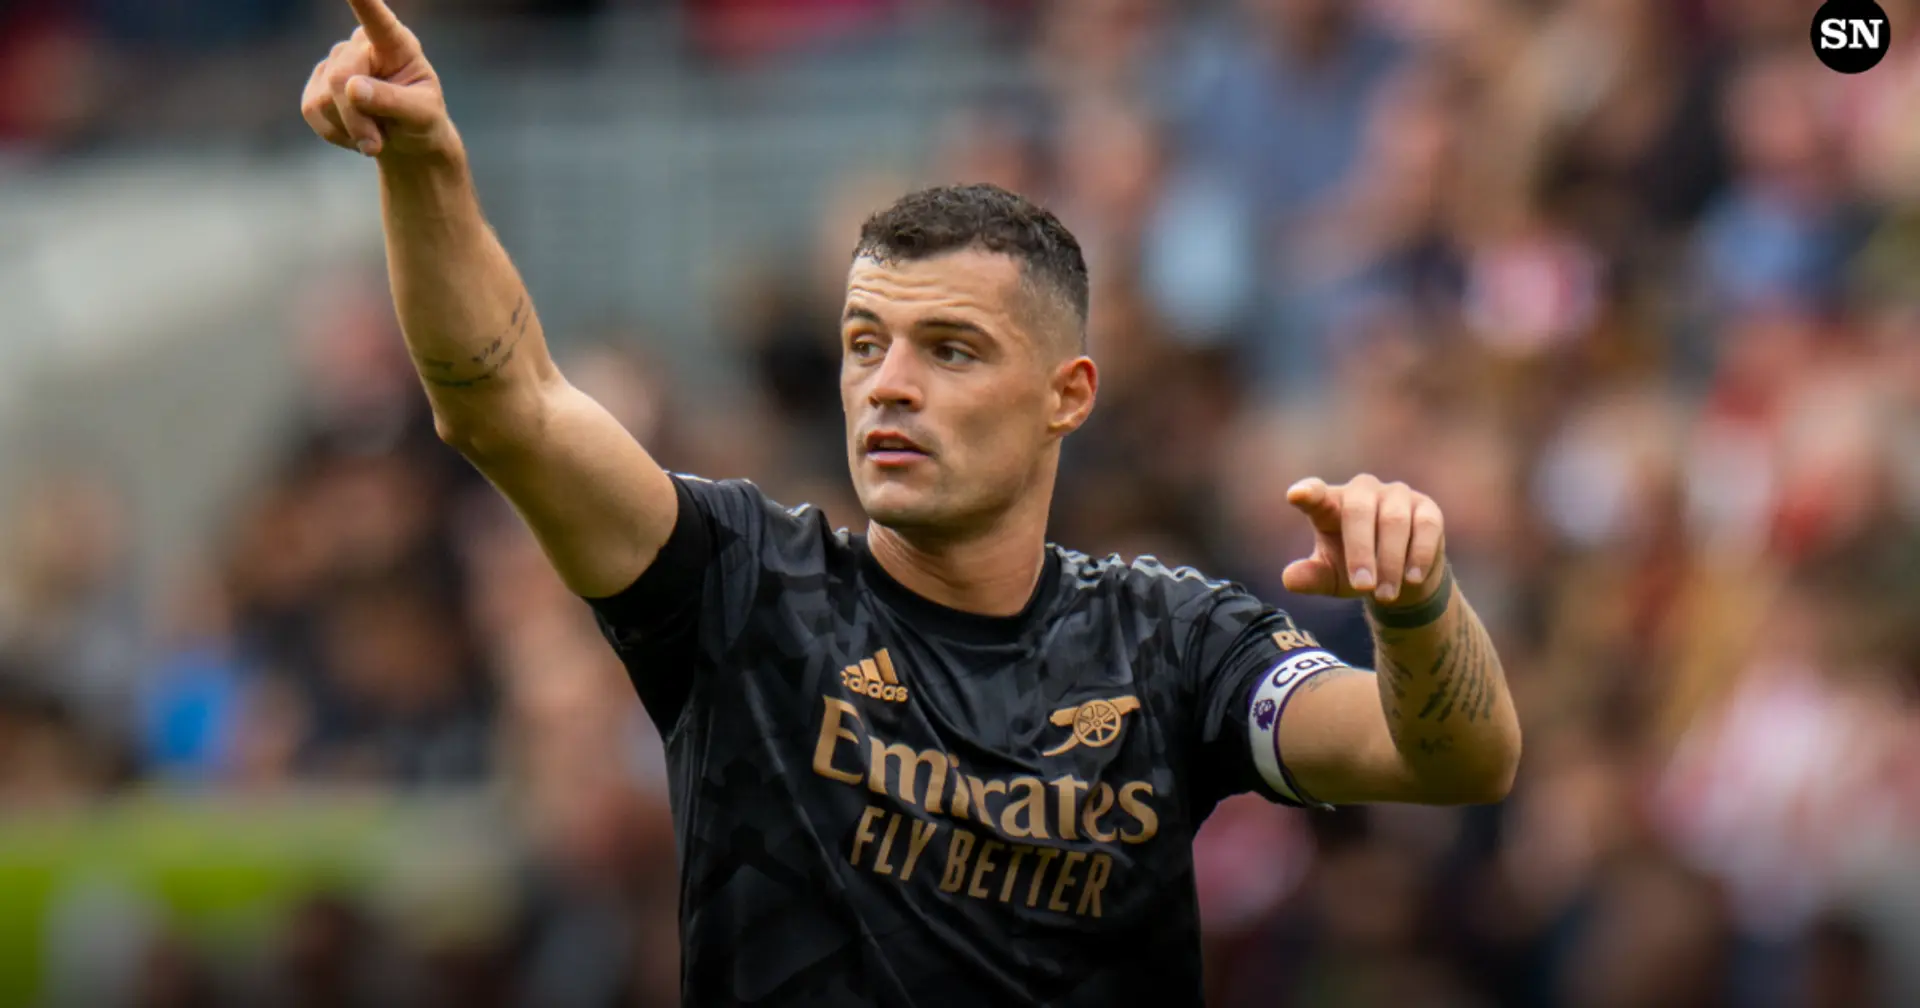 Xhaka among nominees for Player of the Month & 2 more under-radar stories at Arsenal today